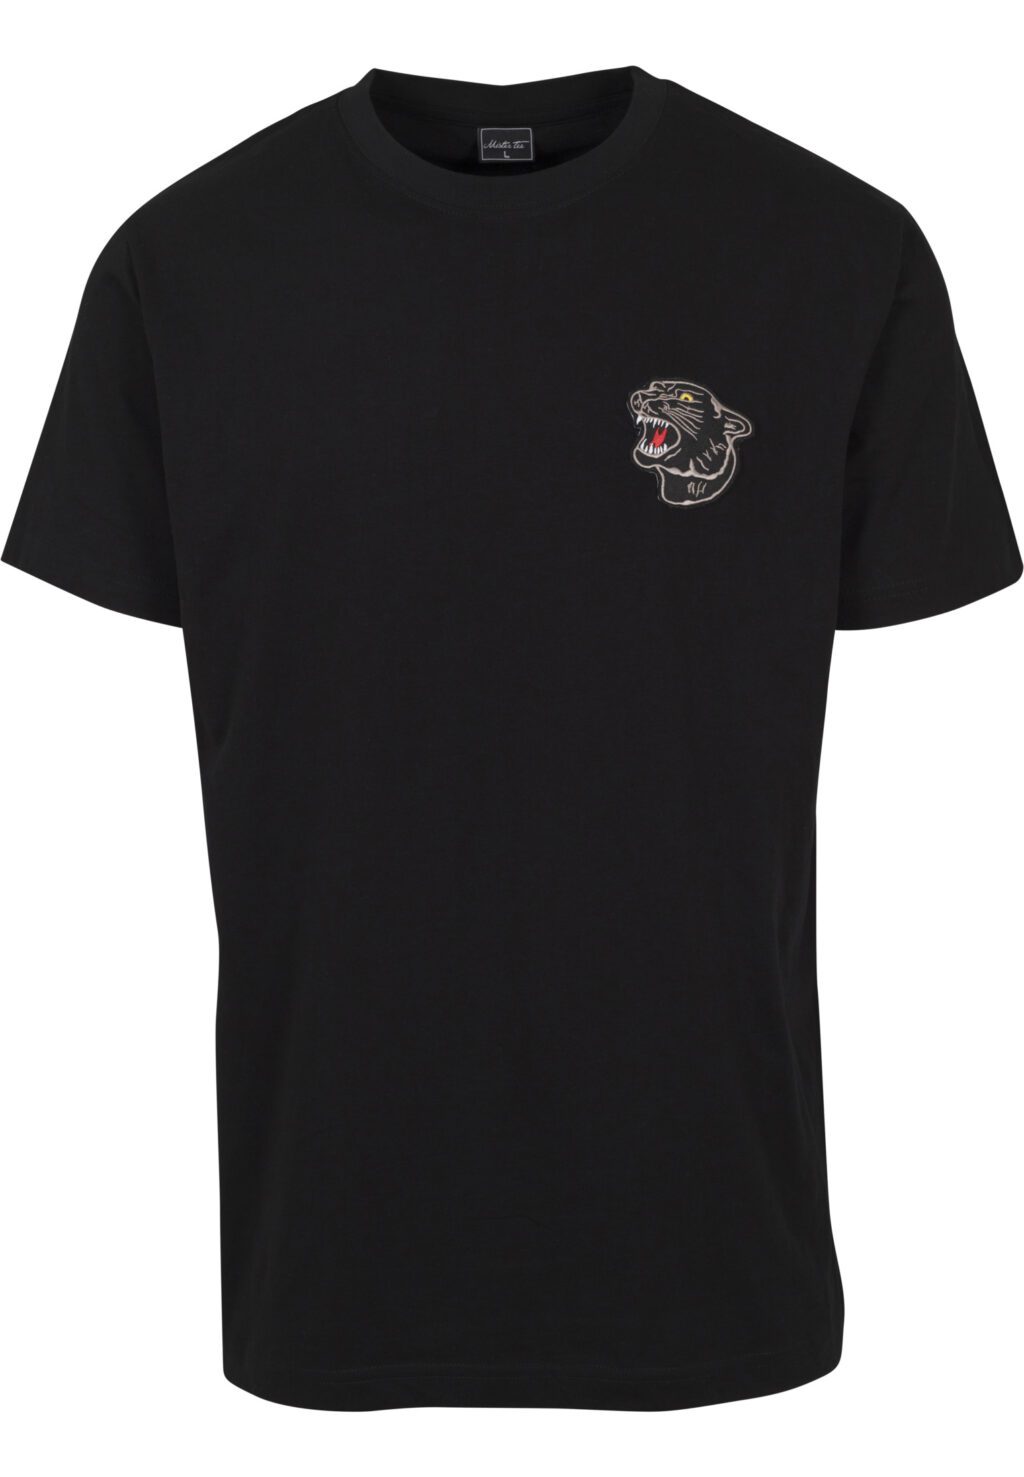 Embroidered Panther Tee black MT695